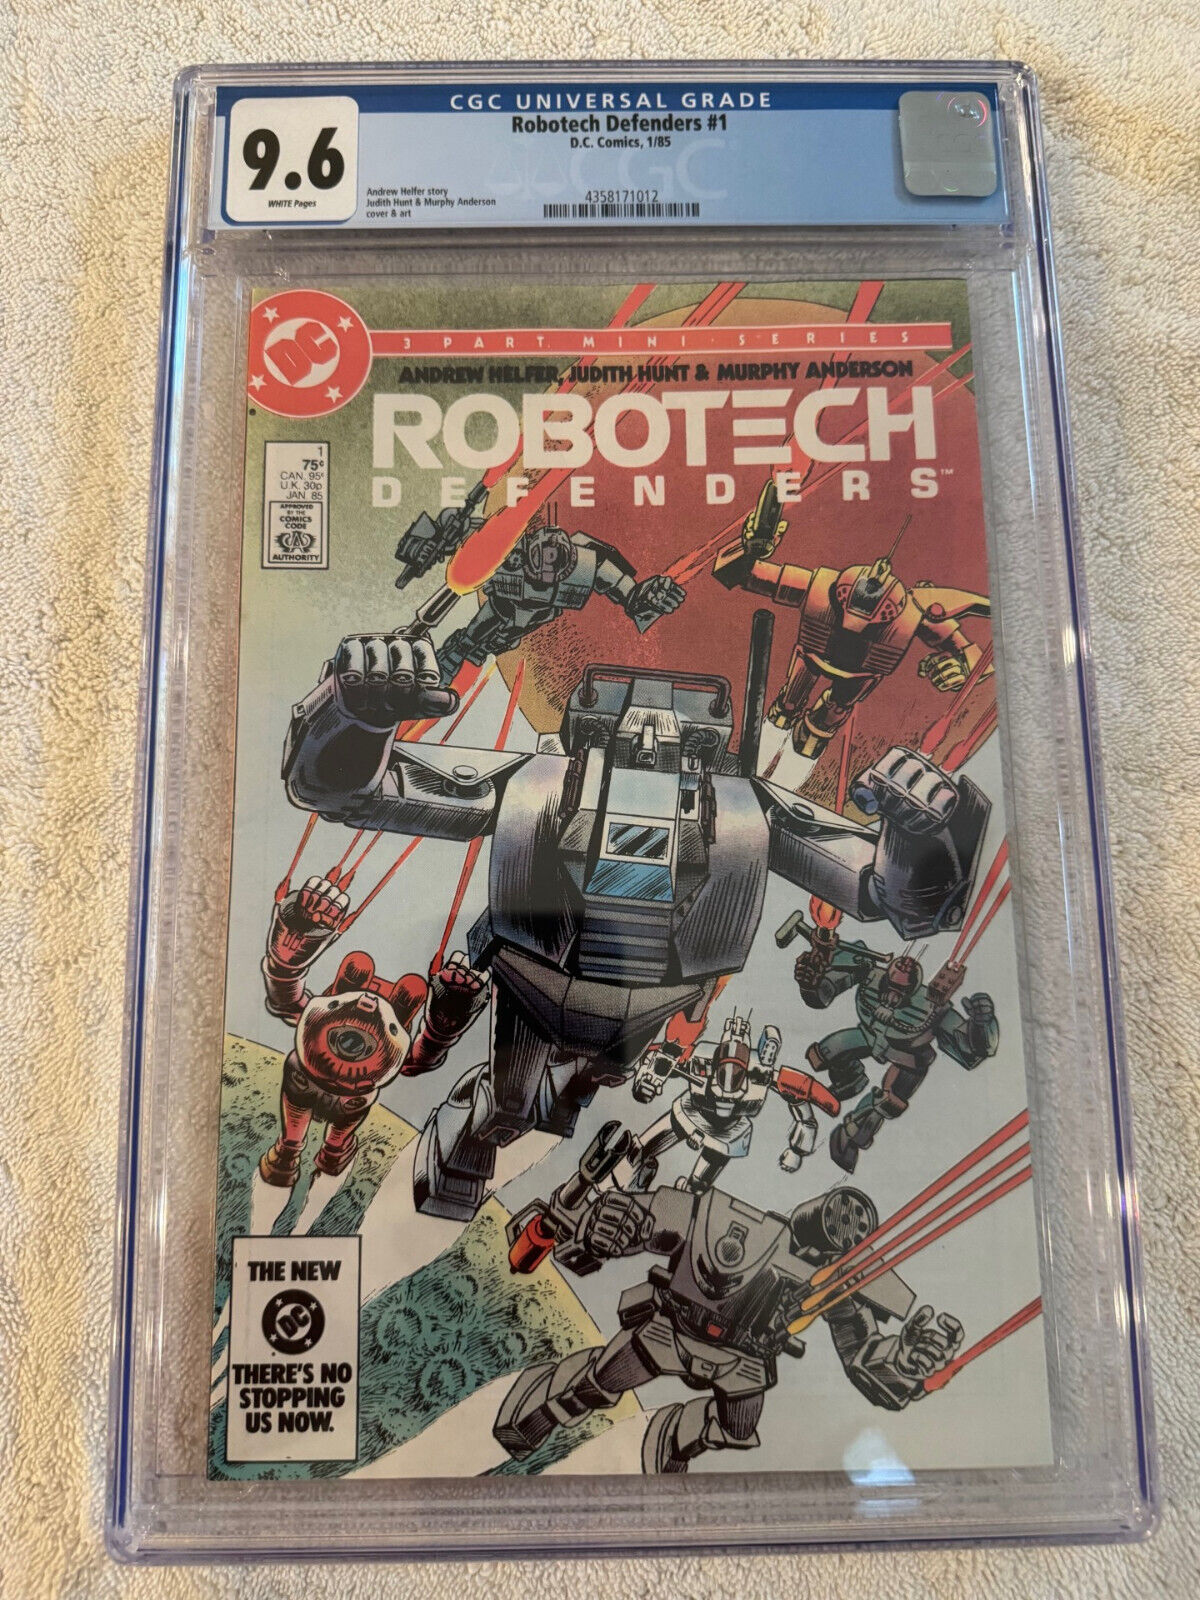 Robotech Defenders #1 - CGC 9.6 - White Pages - DC Comics 1985